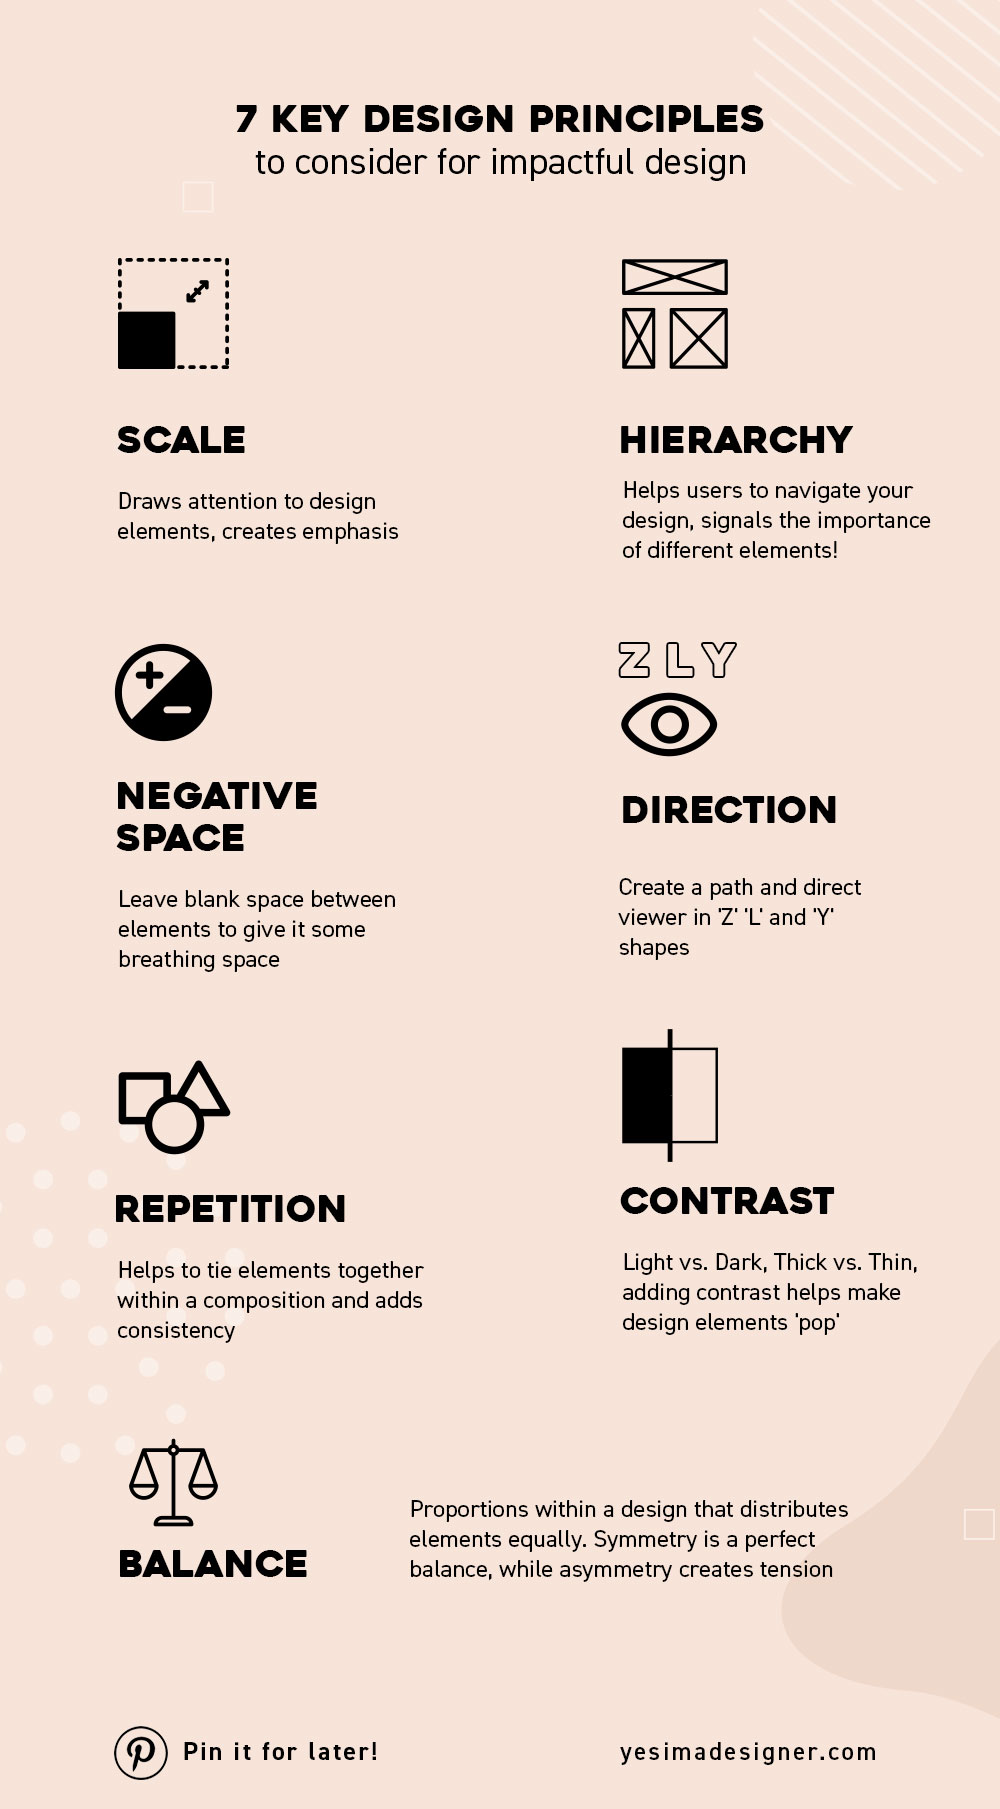 What are the 6 basic principles of layout and composition design?